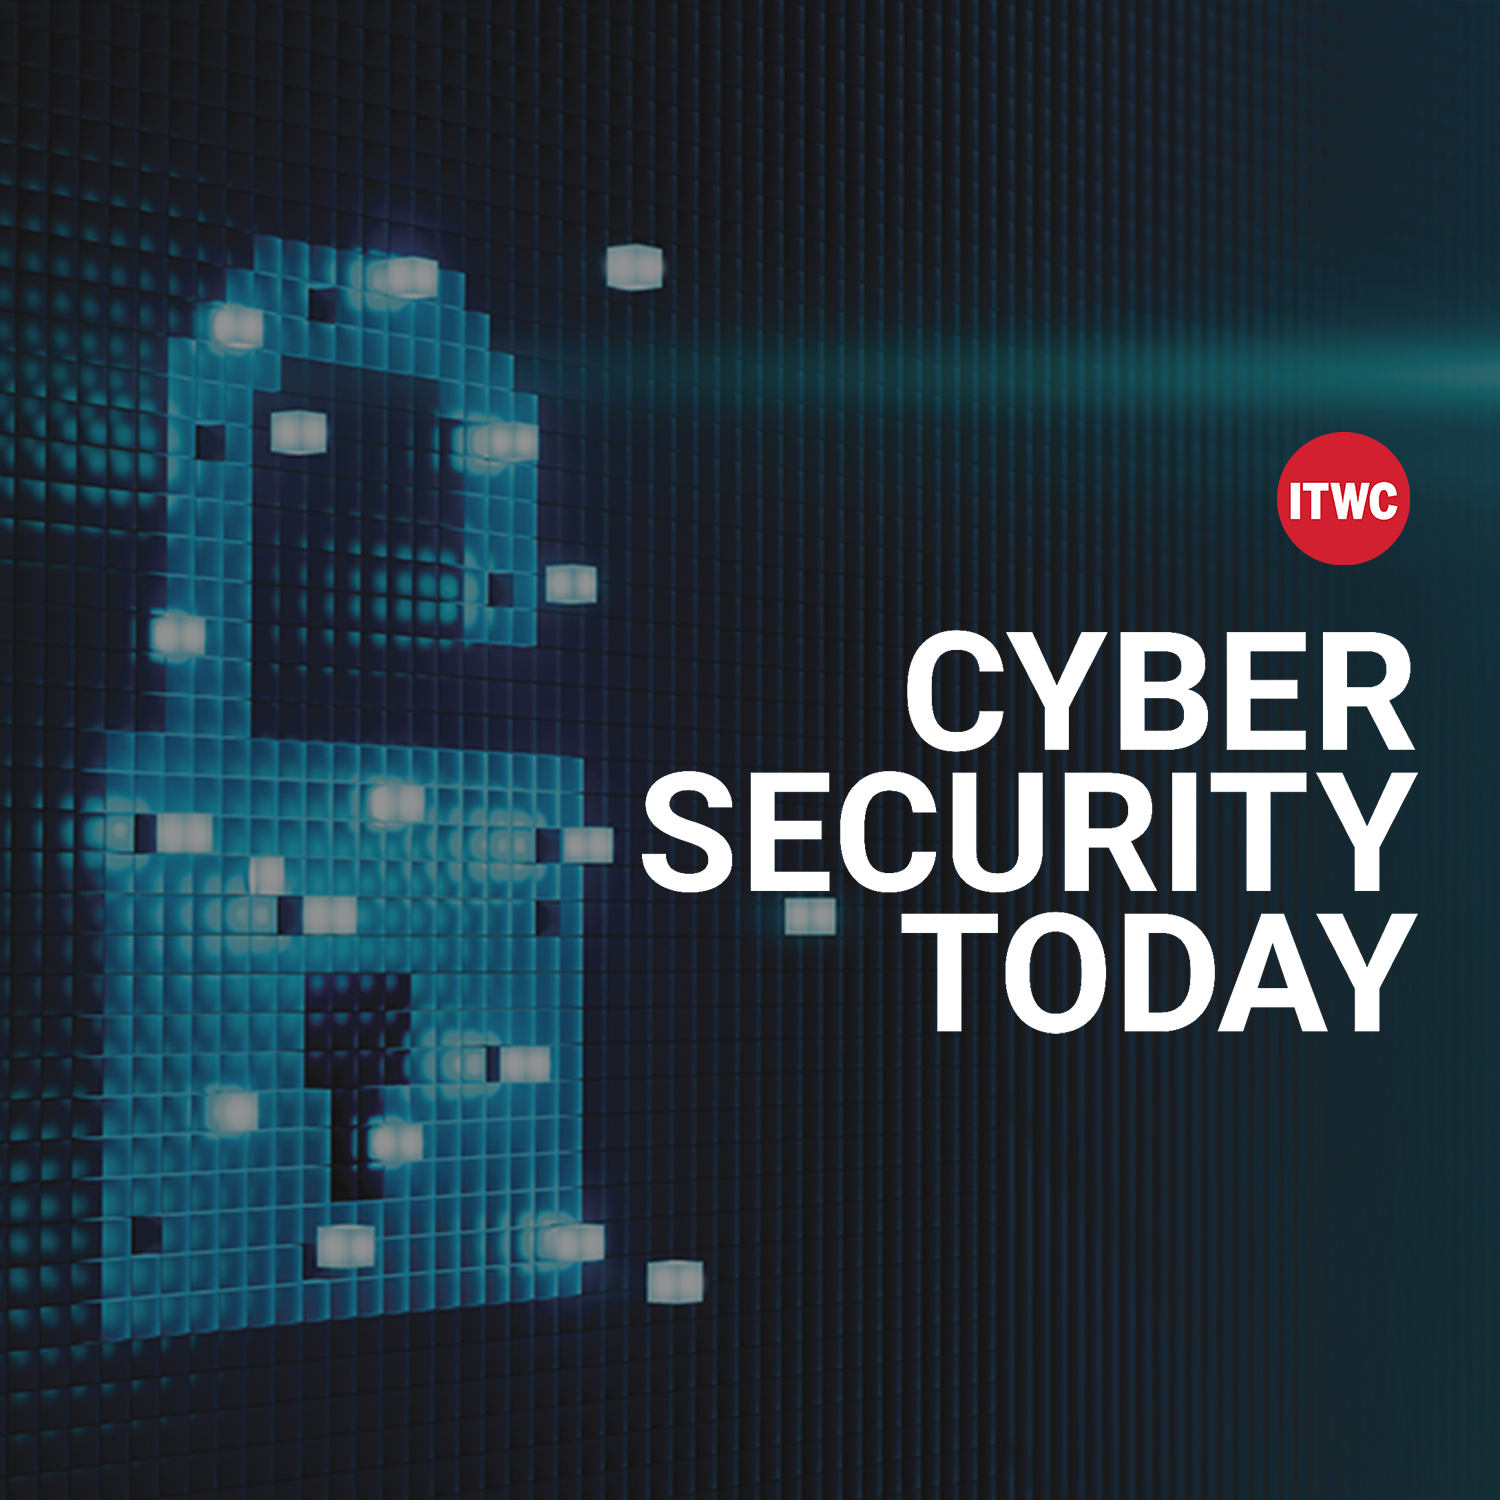 Cyber Security Today – Debian Linux had the most vulnerabilities last year, VMware security updates released, and more